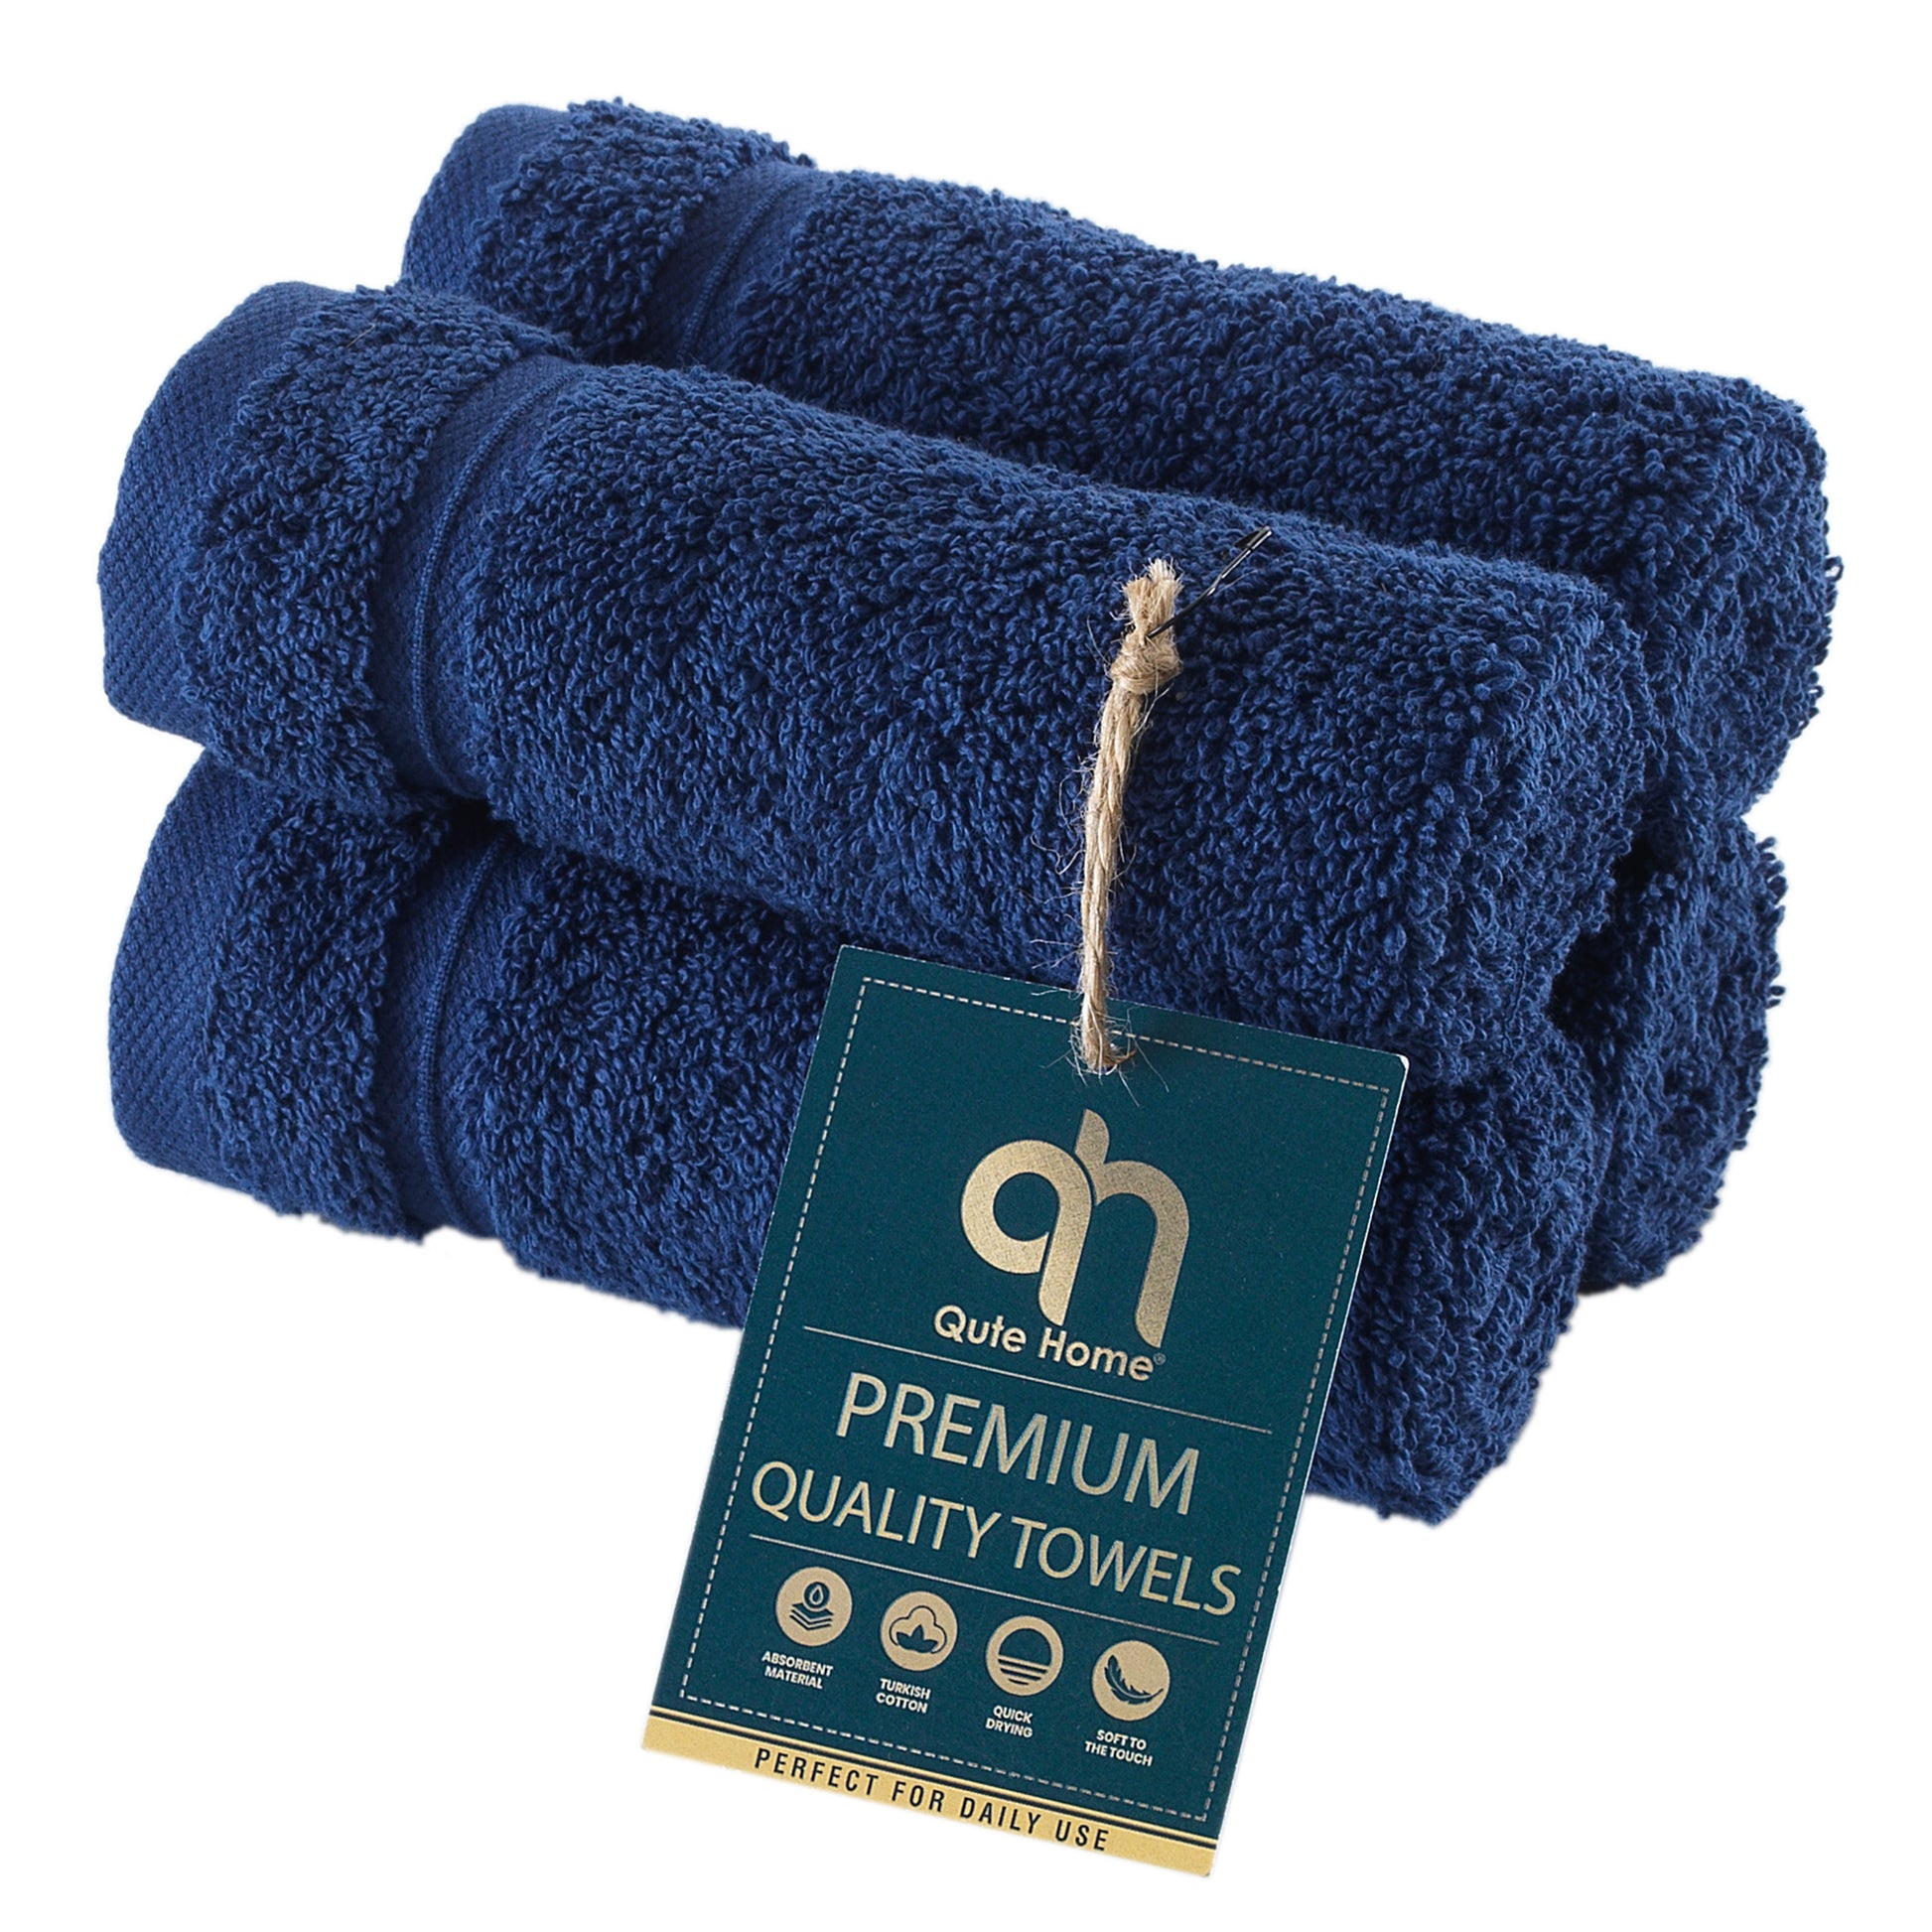 4 PIECE LUXURY LARGE SIZE BATH TOWEL SET FOR HOME HOTEL SPAS GUEST by  Hurbane Home, Navy Blue, 1 - Harris Teeter